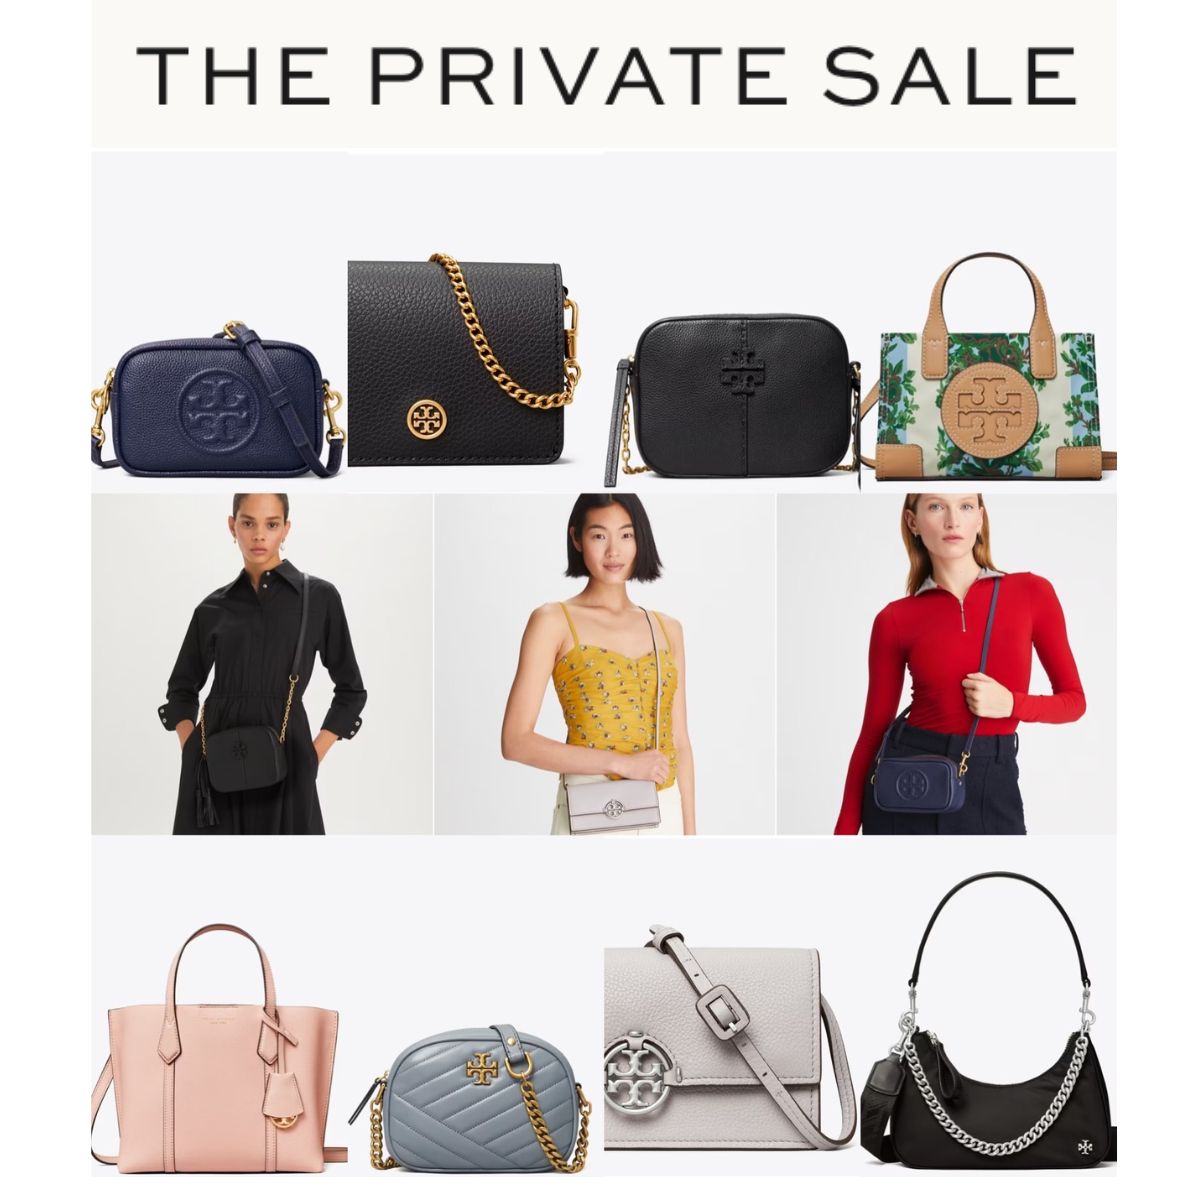 Tory Burch private sale | Handbags and wallets from as low as $119 | Smart  Savers